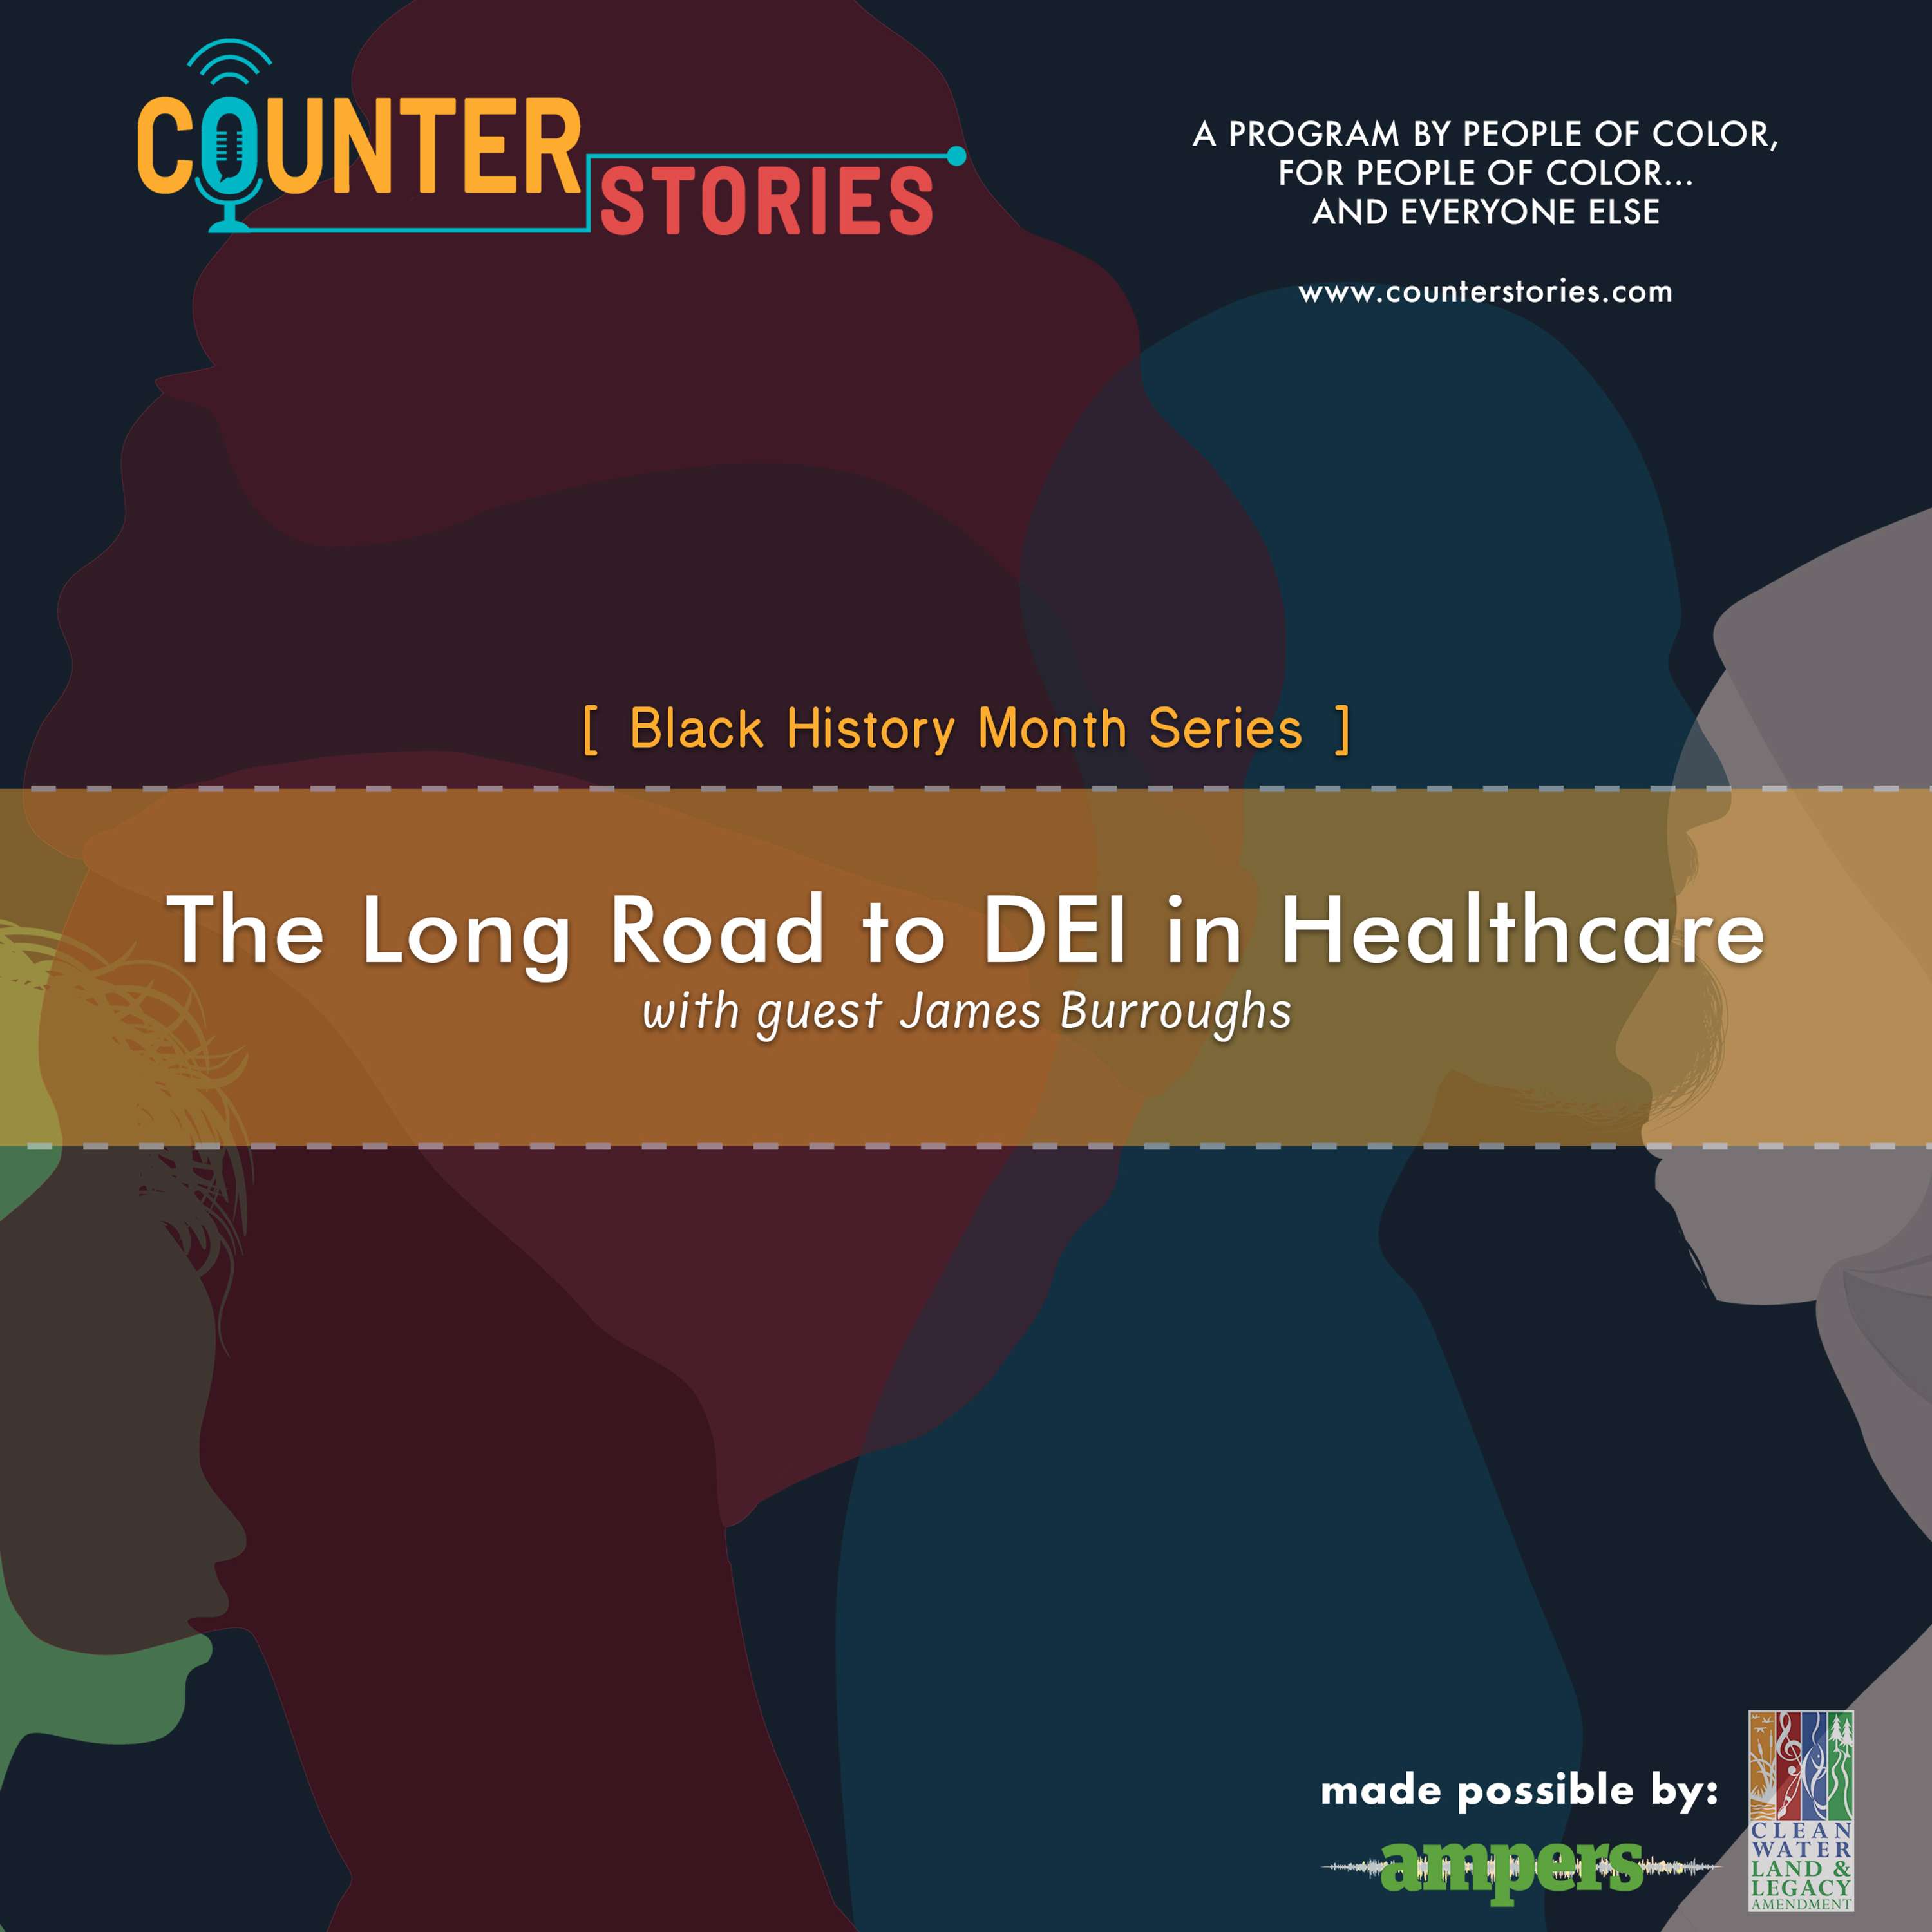 The Long Road to DEI in Healthcare